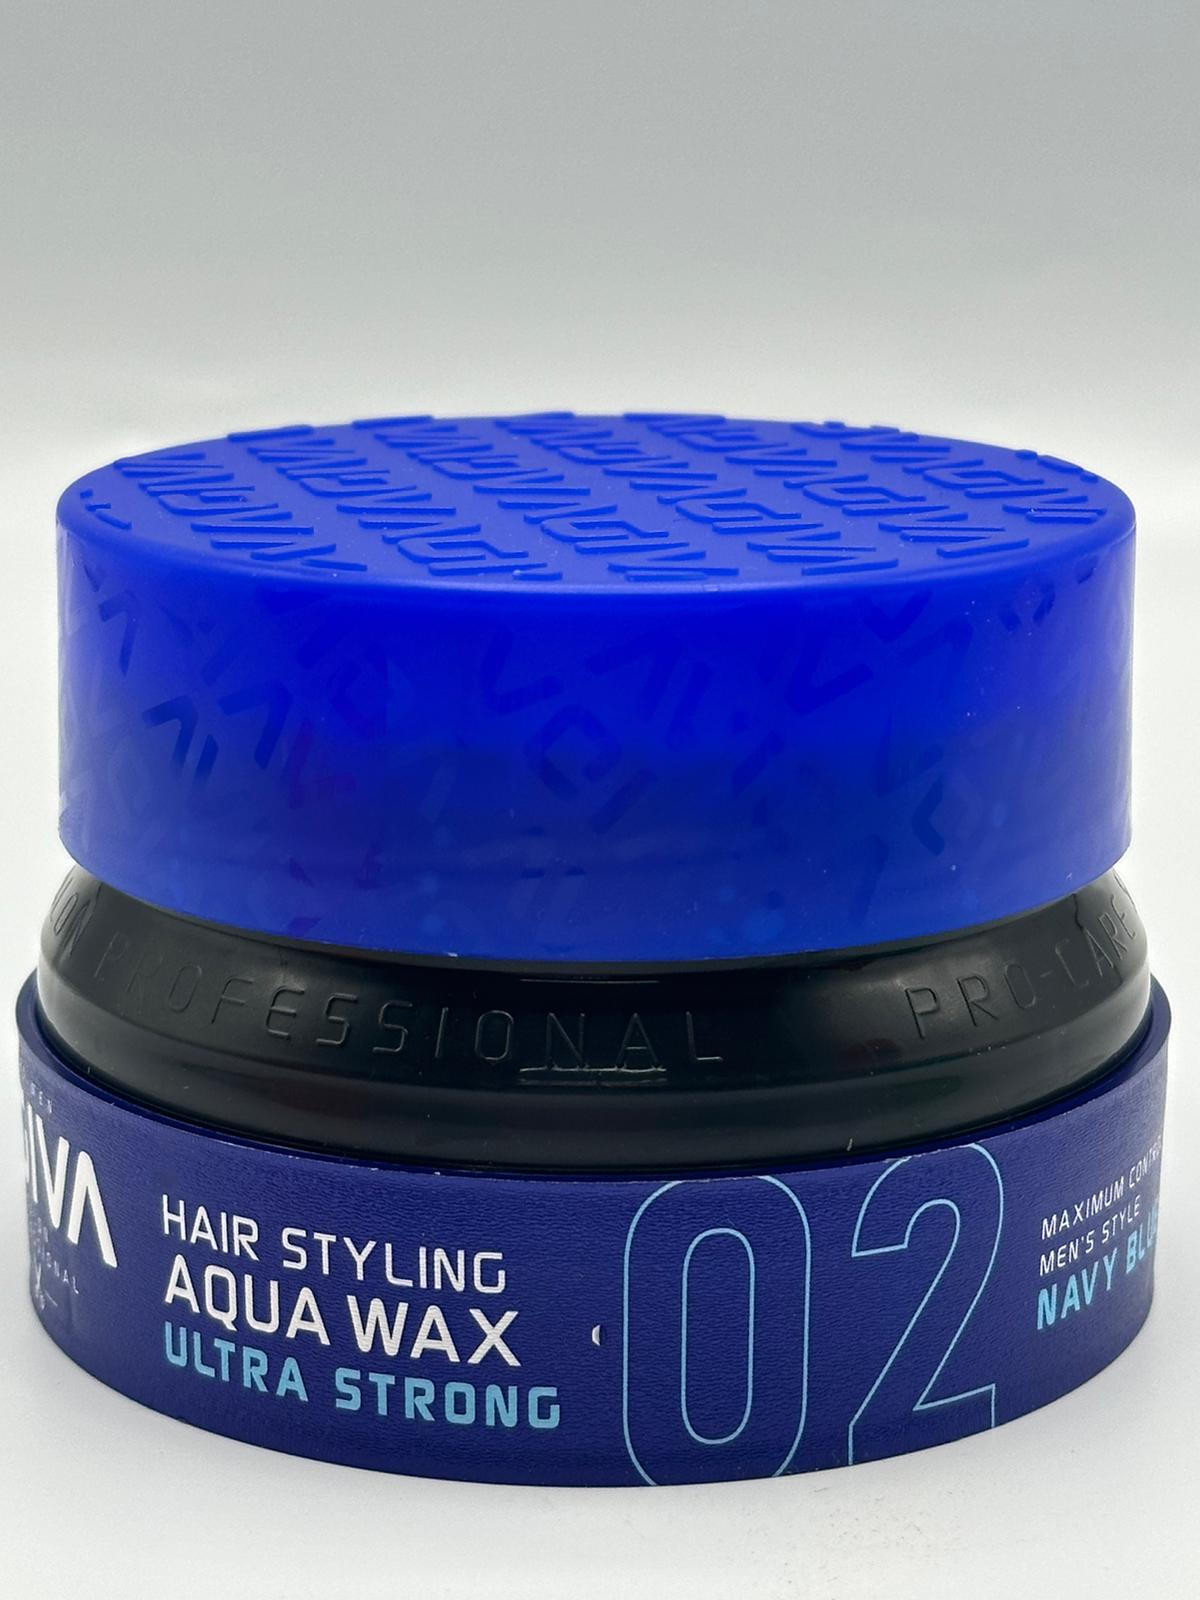 AGIVA HAIR WAX NO 2 STRONG HOLD 155ML